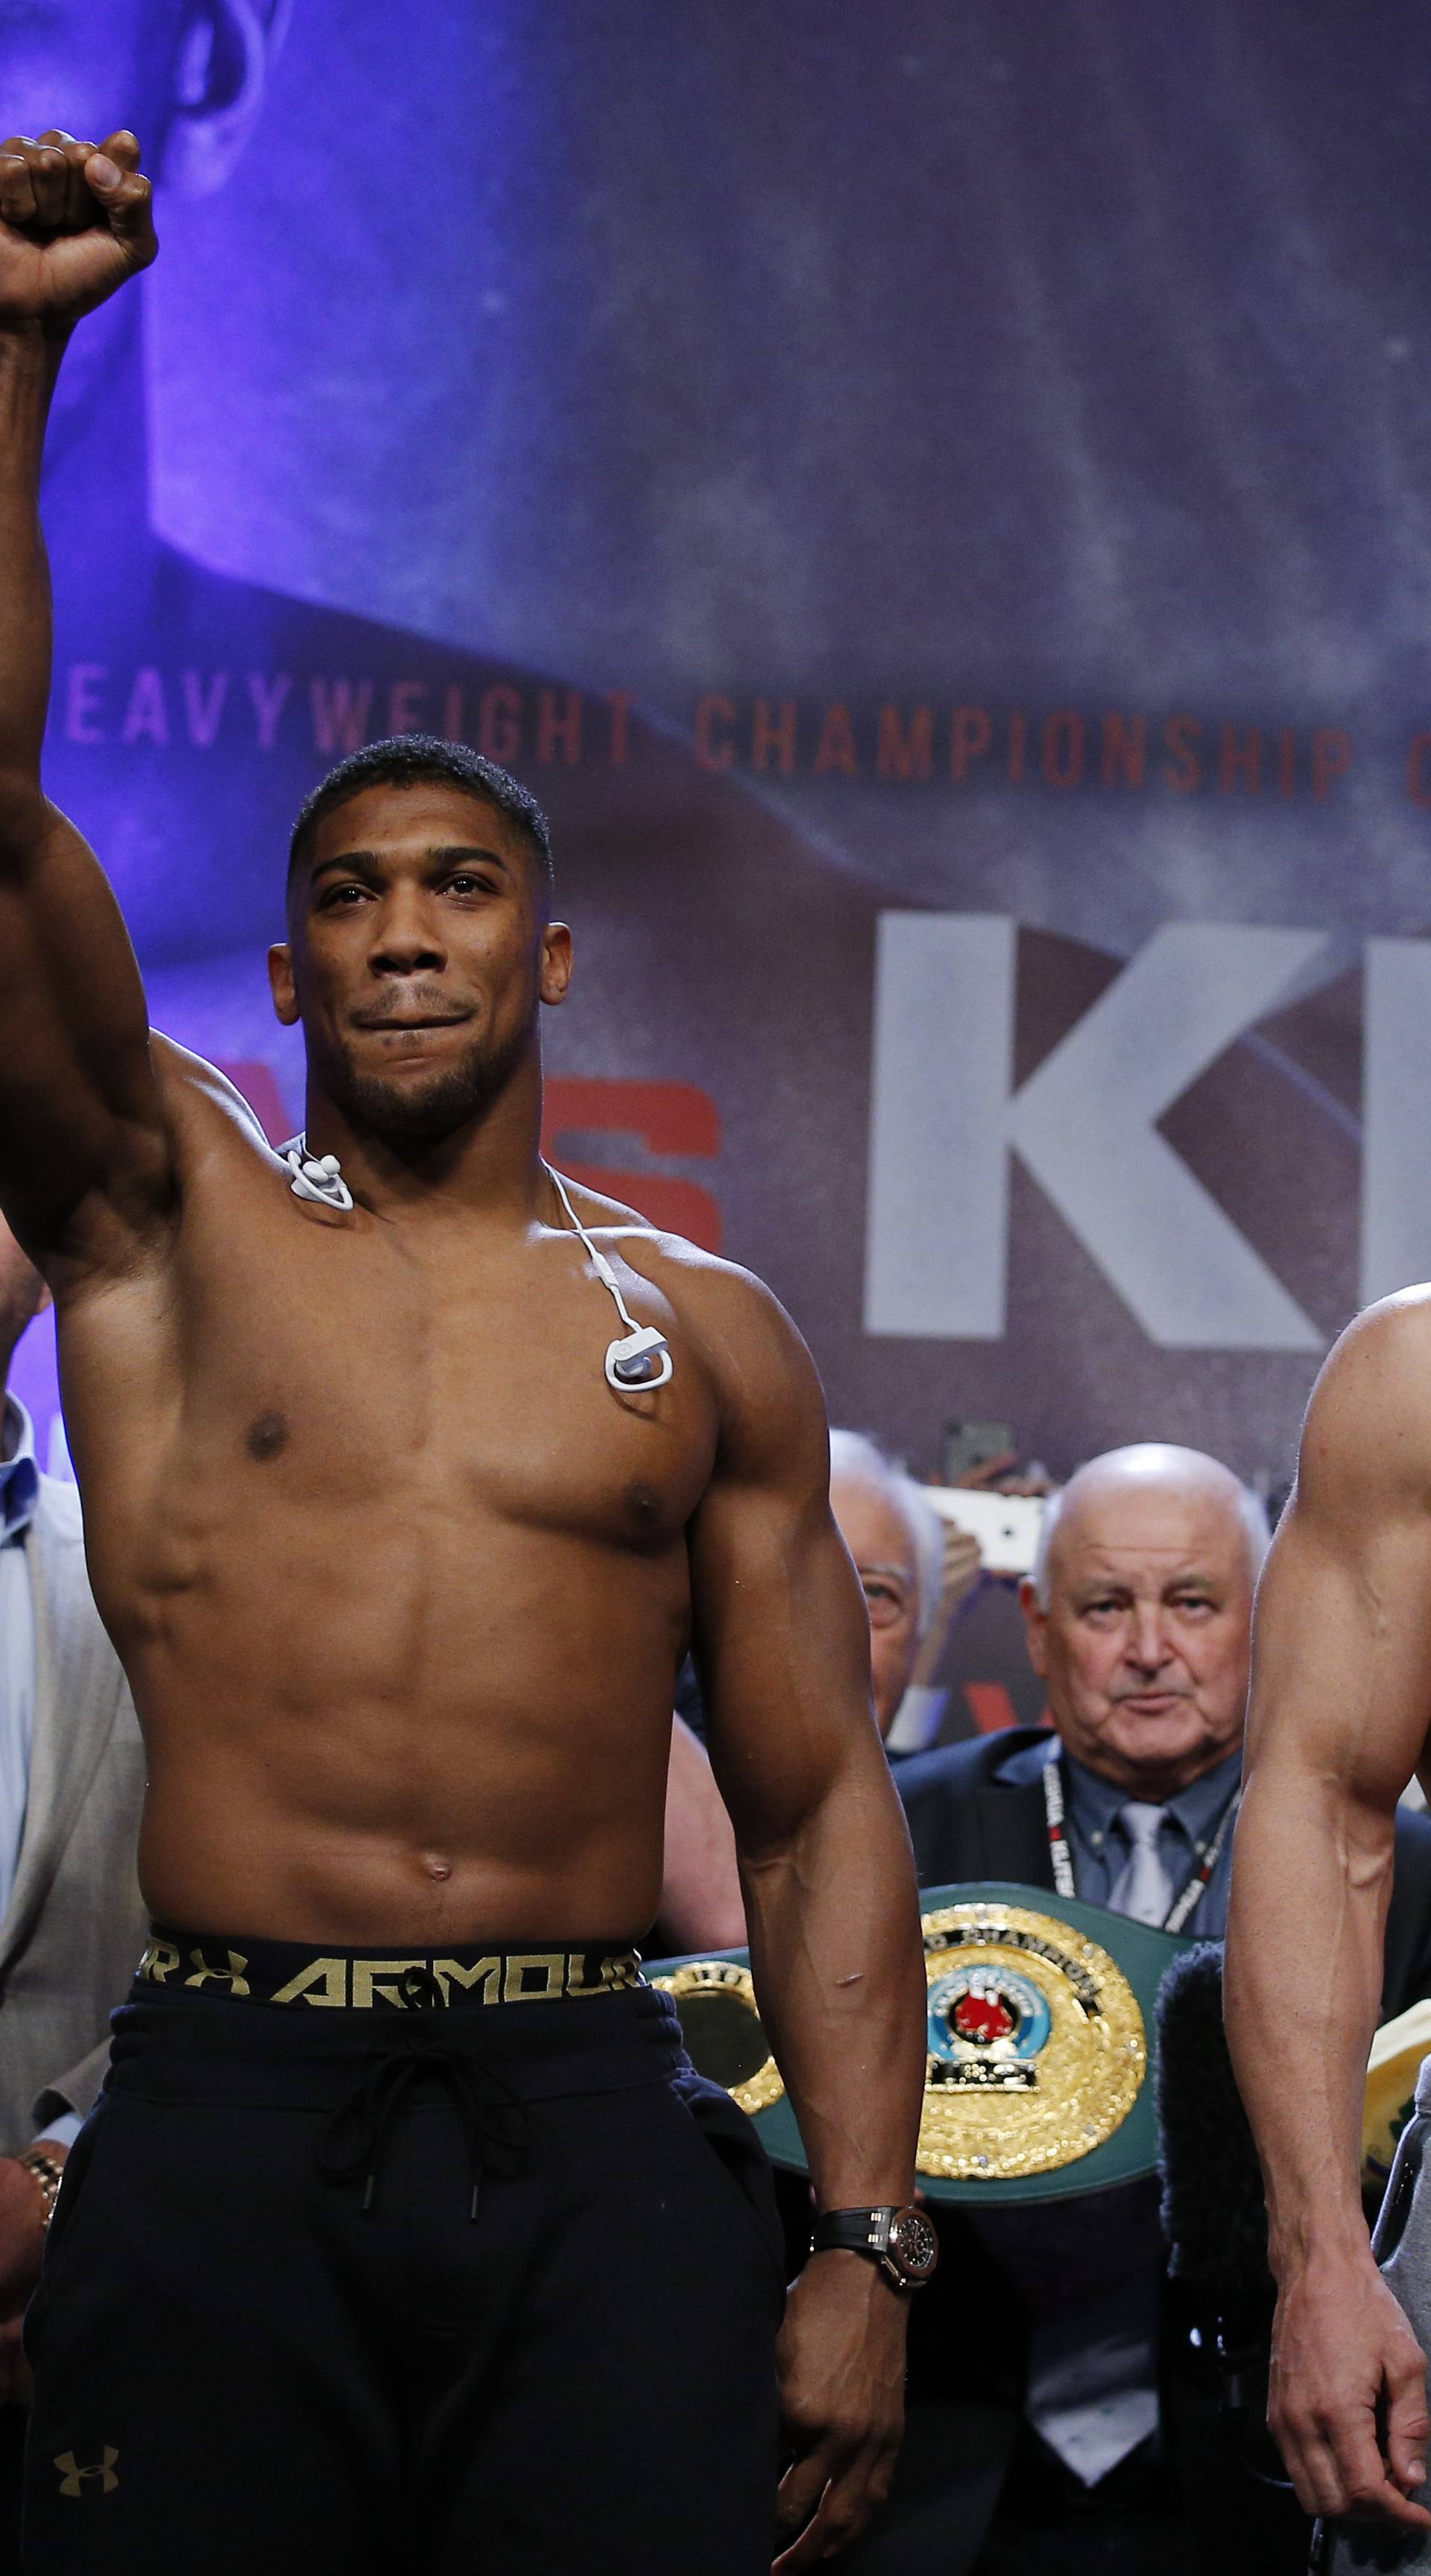 Anthony Joshua and Wladimir Klitschko during the weigh-in